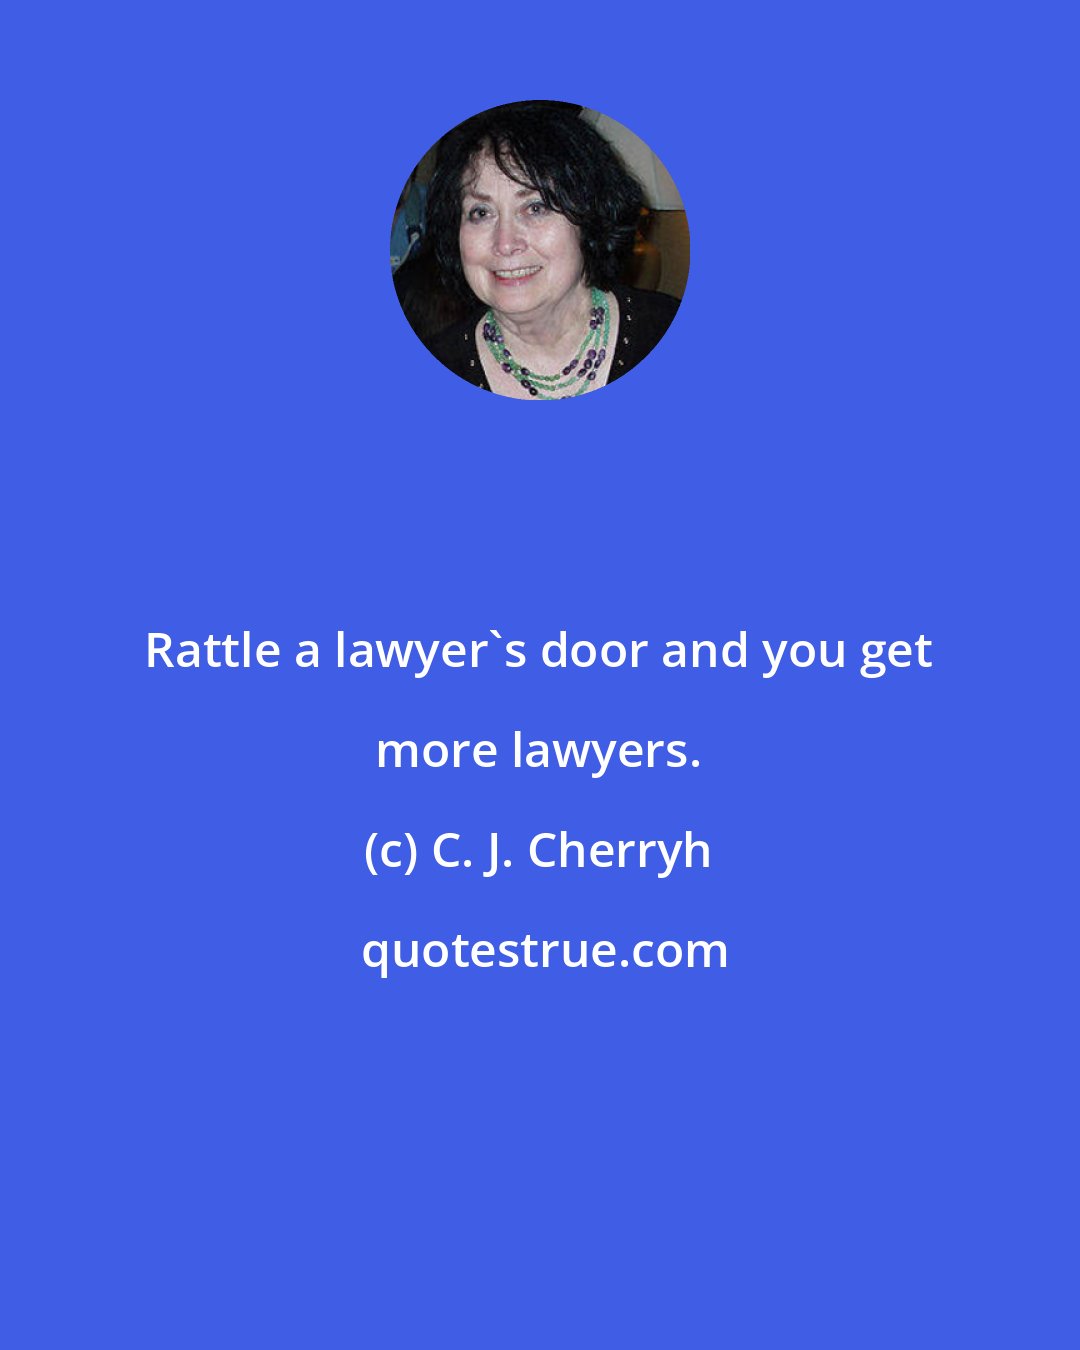 C. J. Cherryh: Rattle a lawyer's door and you get more lawyers.